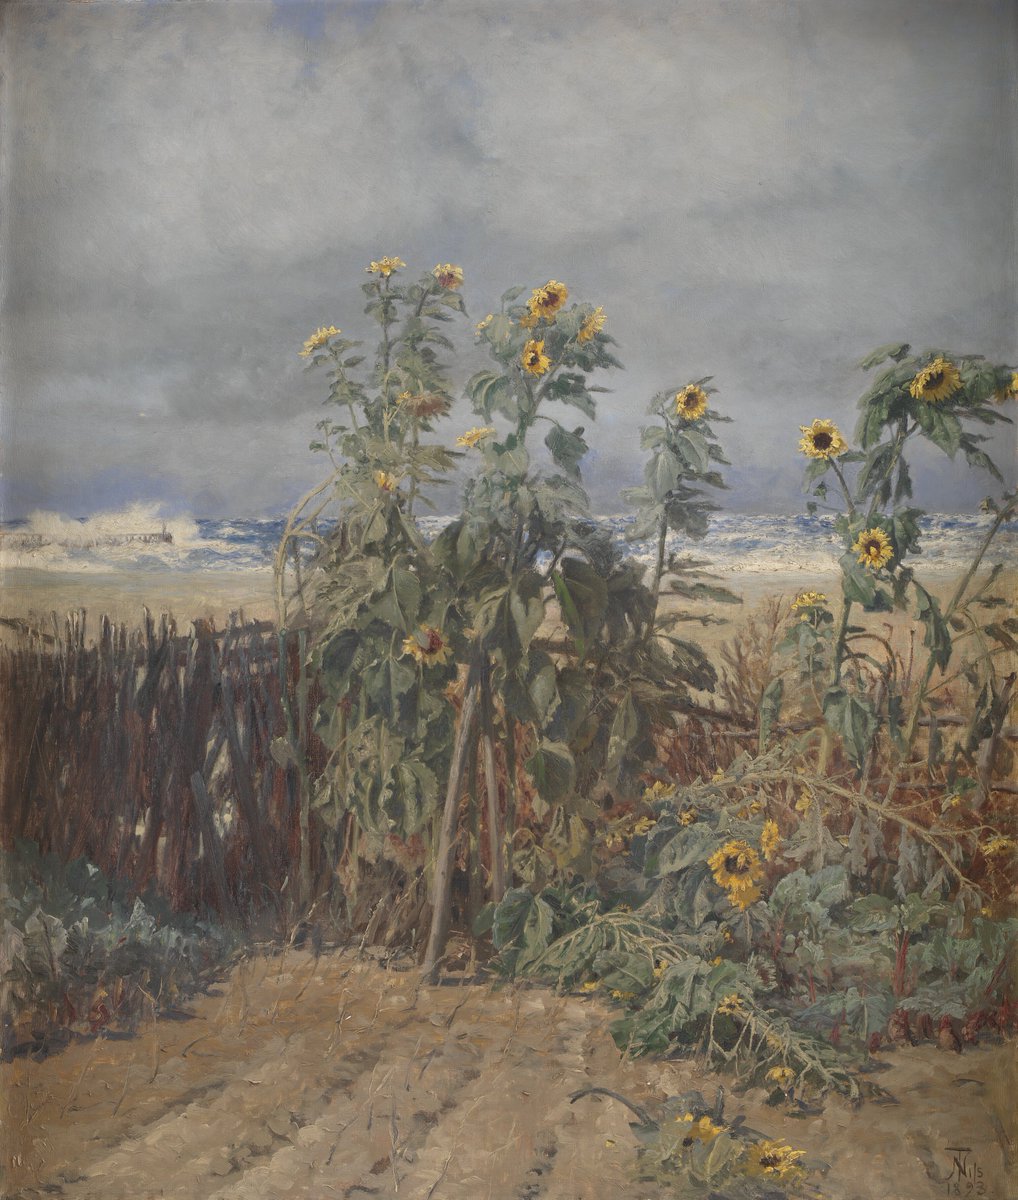 Thorvald Niss Sunflowers on a Beach 1893